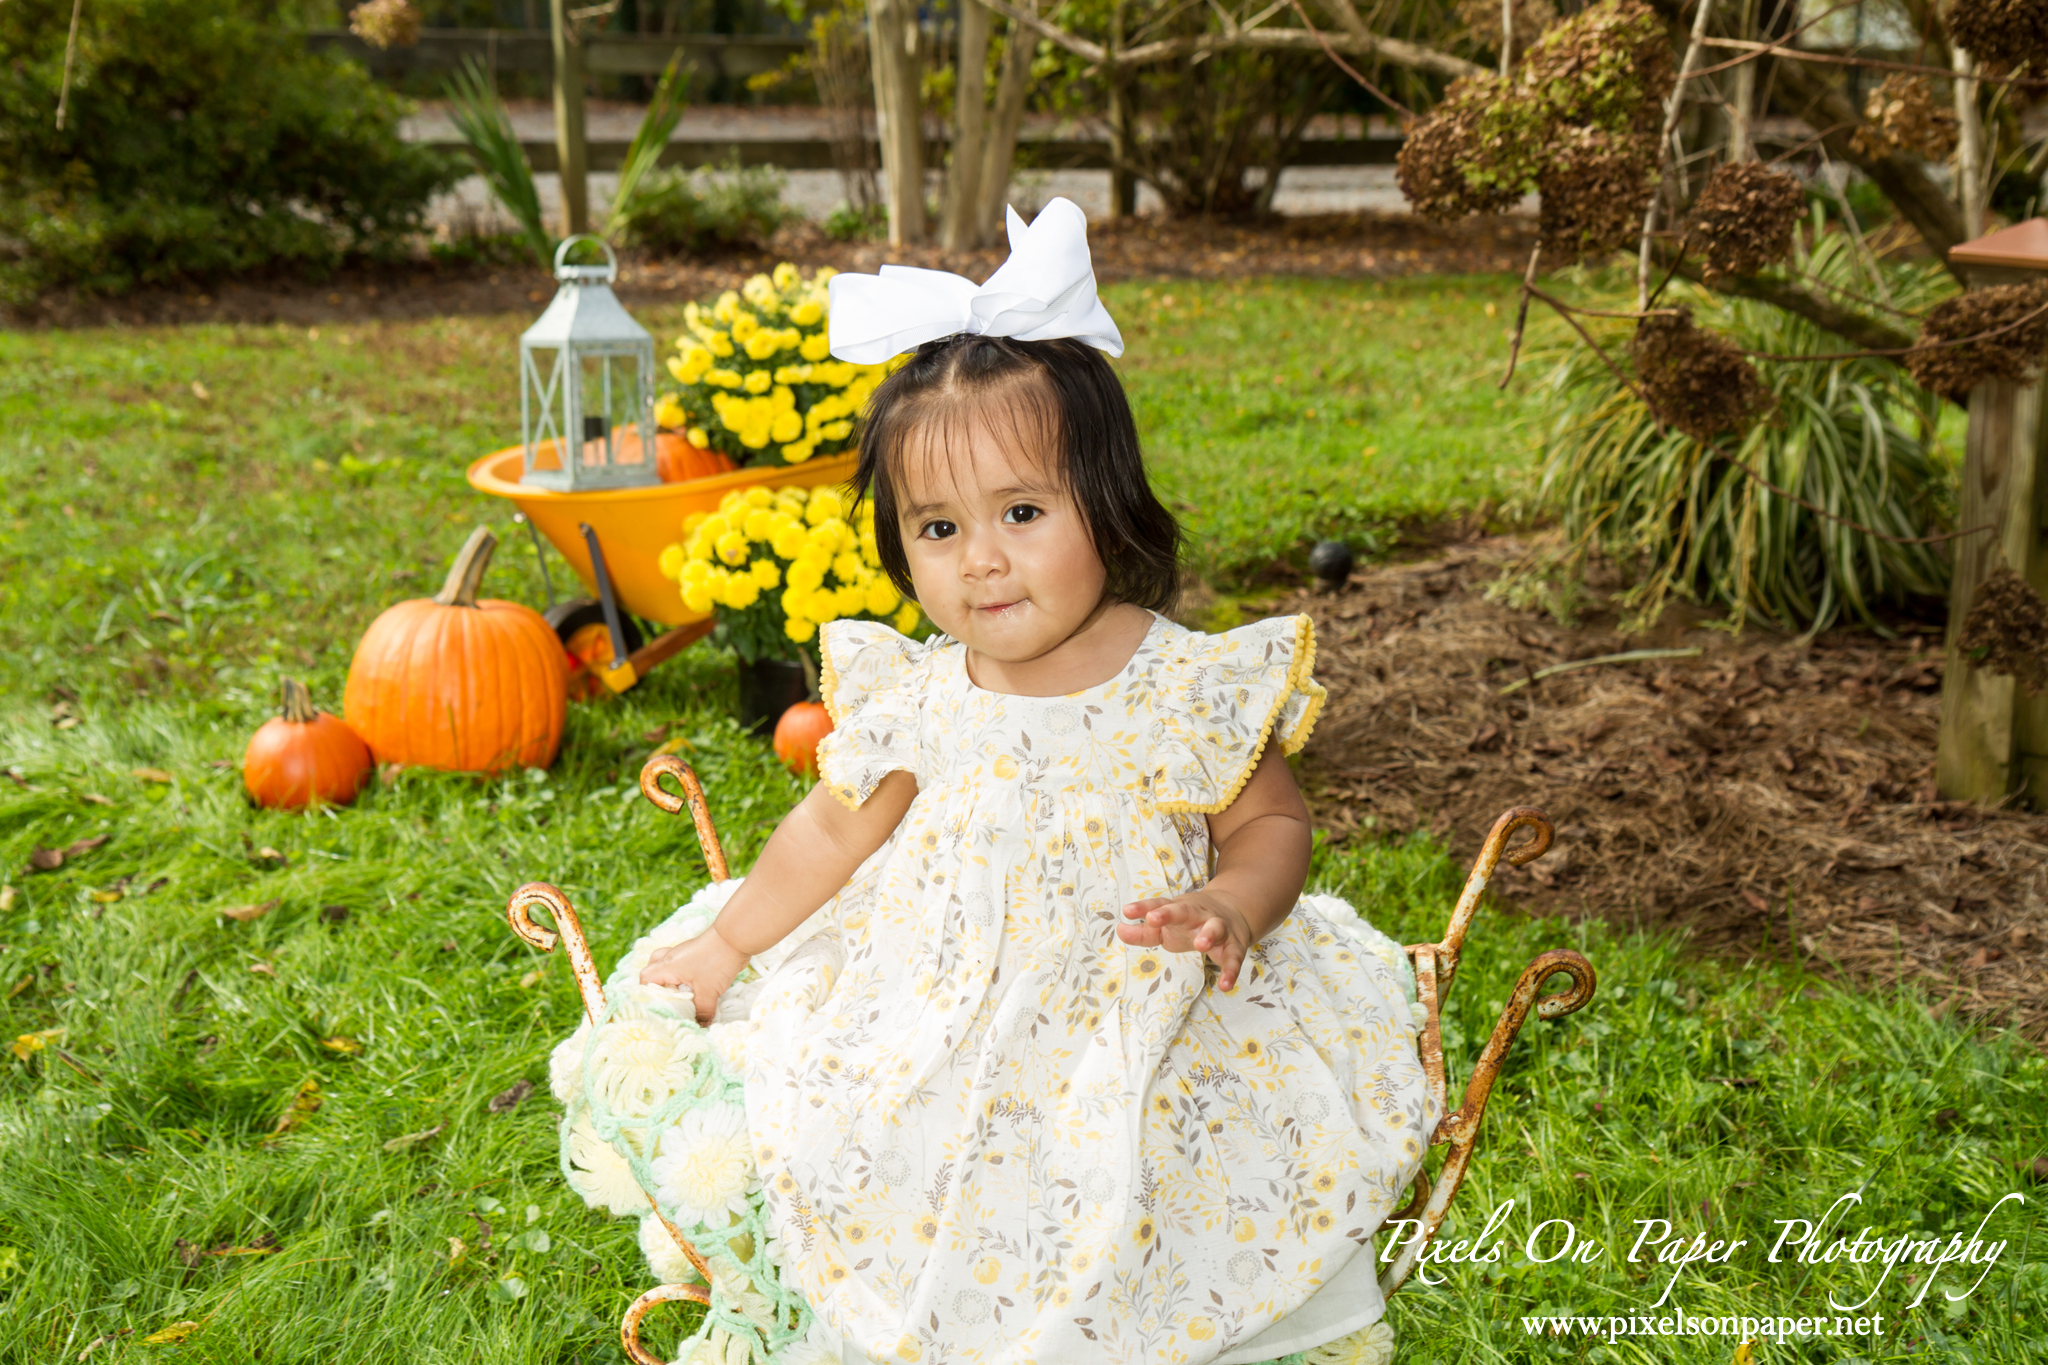 Pixels On Paper Photography Outdoor Fall One Year Baby Portrait Photo